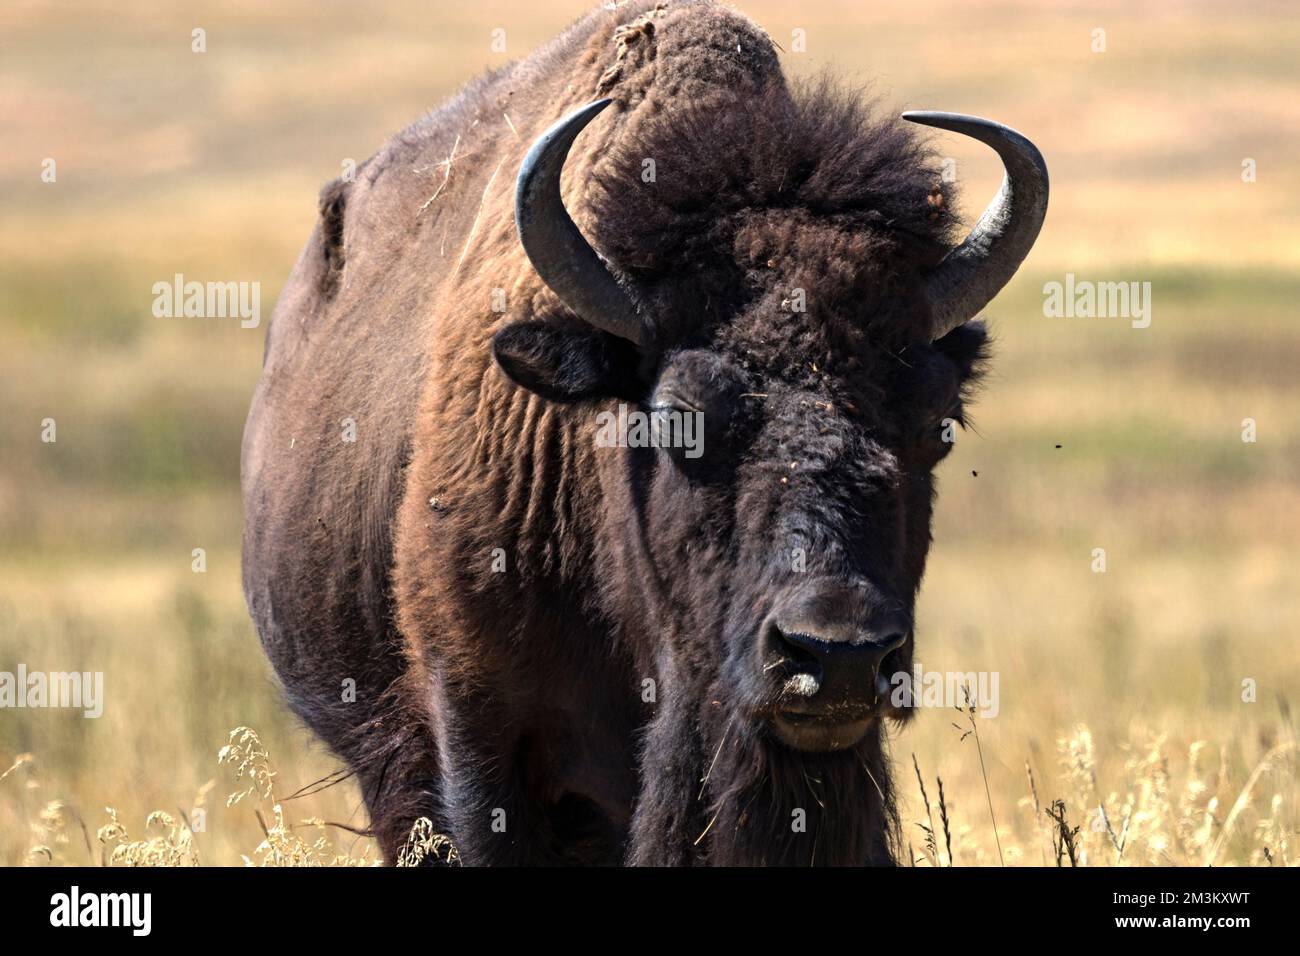 A bison (Bison bison) grazes at the Bison Range nature reserve on the Flathead Indian Reservation in western Montana. Formerly called the National Bis Stock Photo